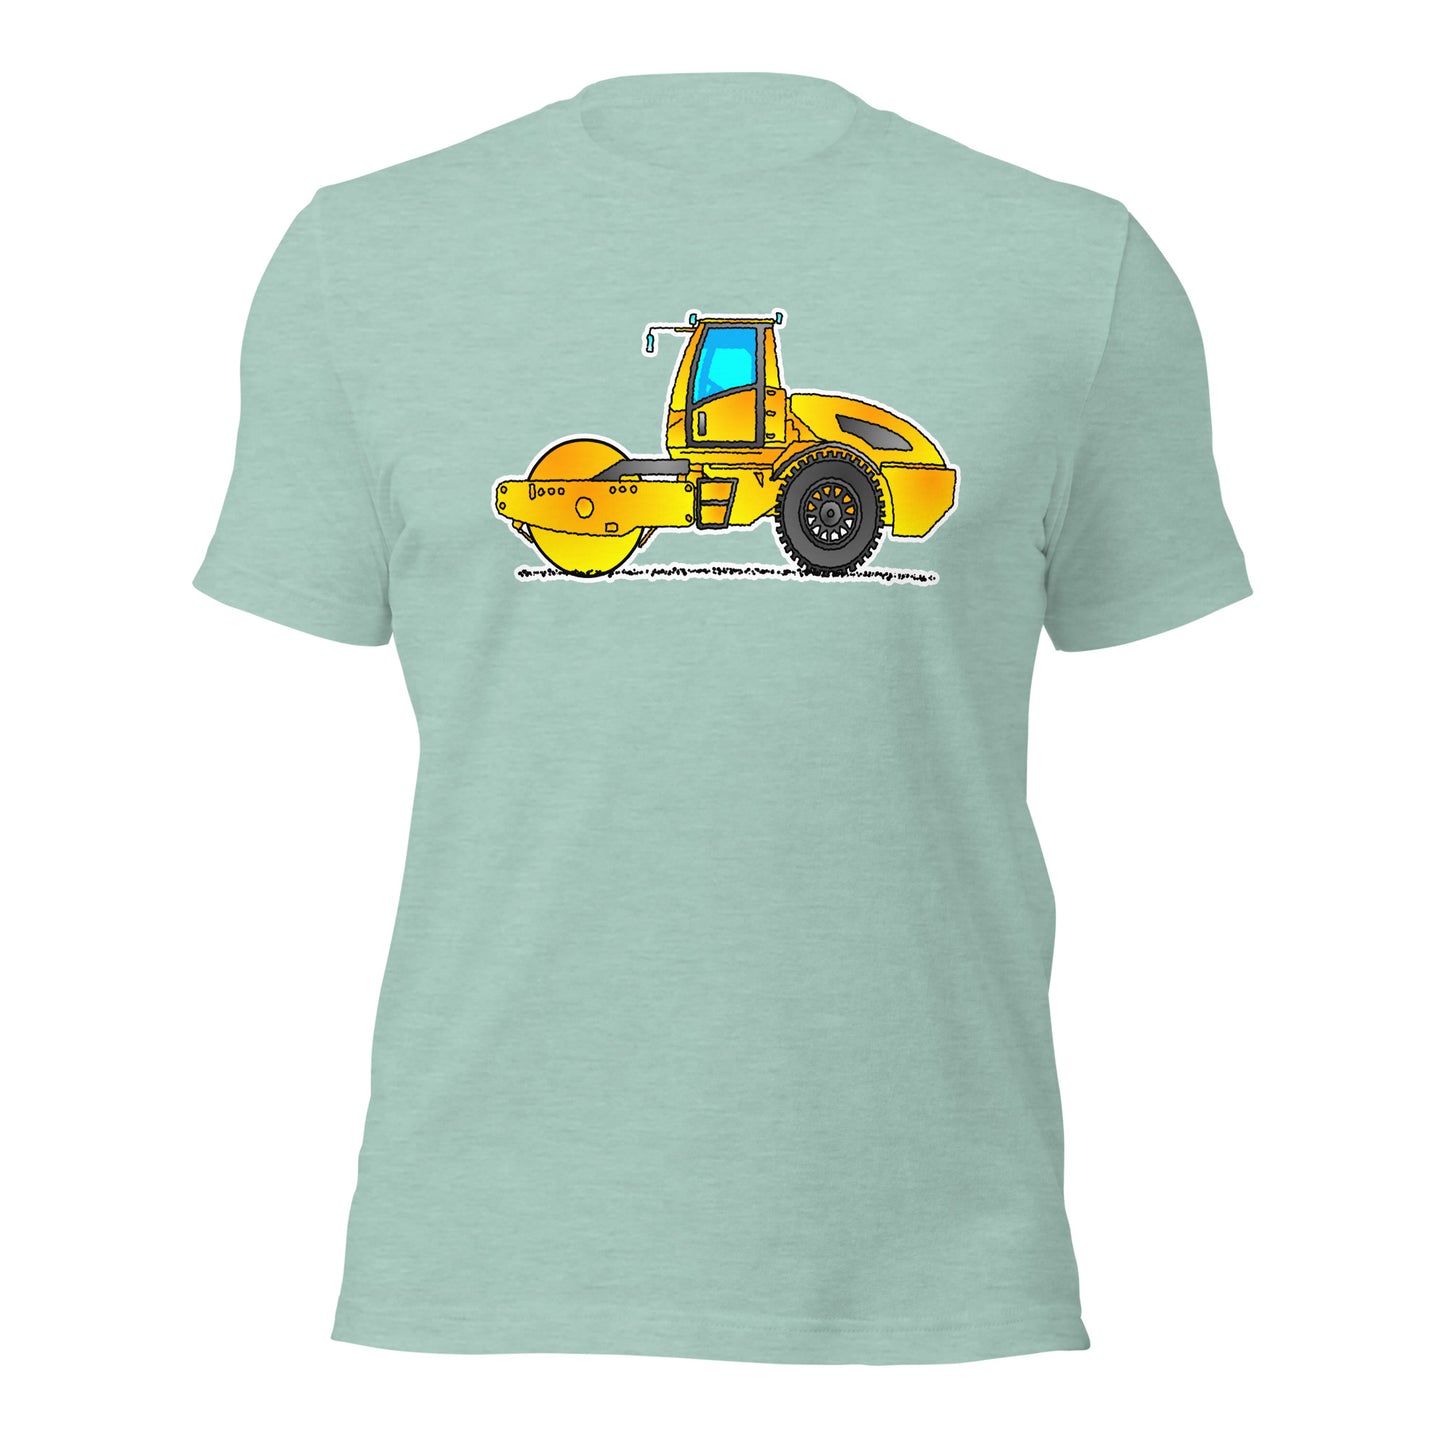 Road Roller T-Shirt, Adult AT016